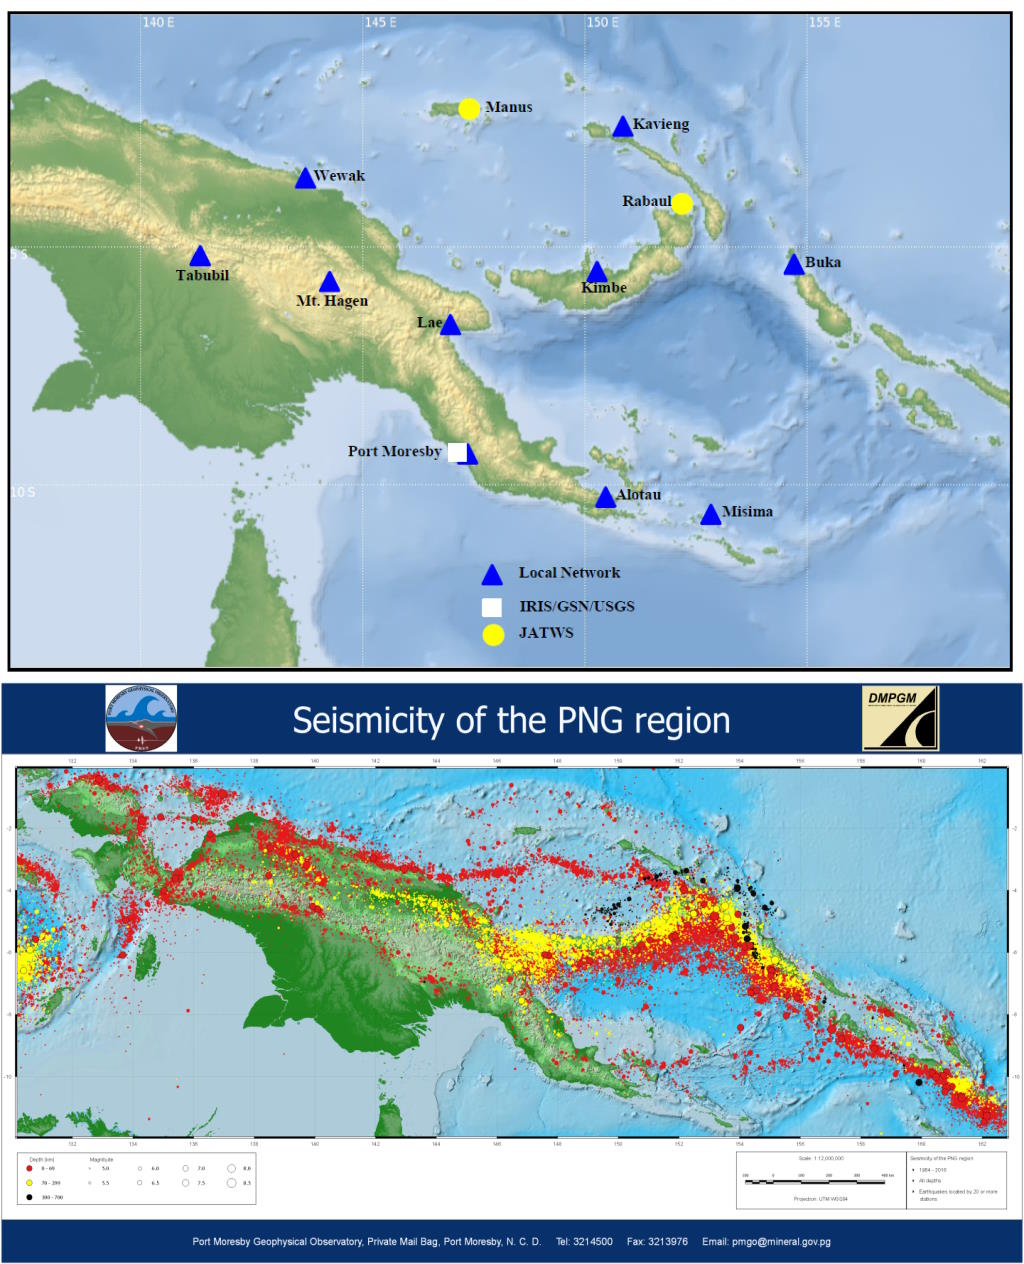 Seismicity of the npg region analyzed by a Harvard astronomer.